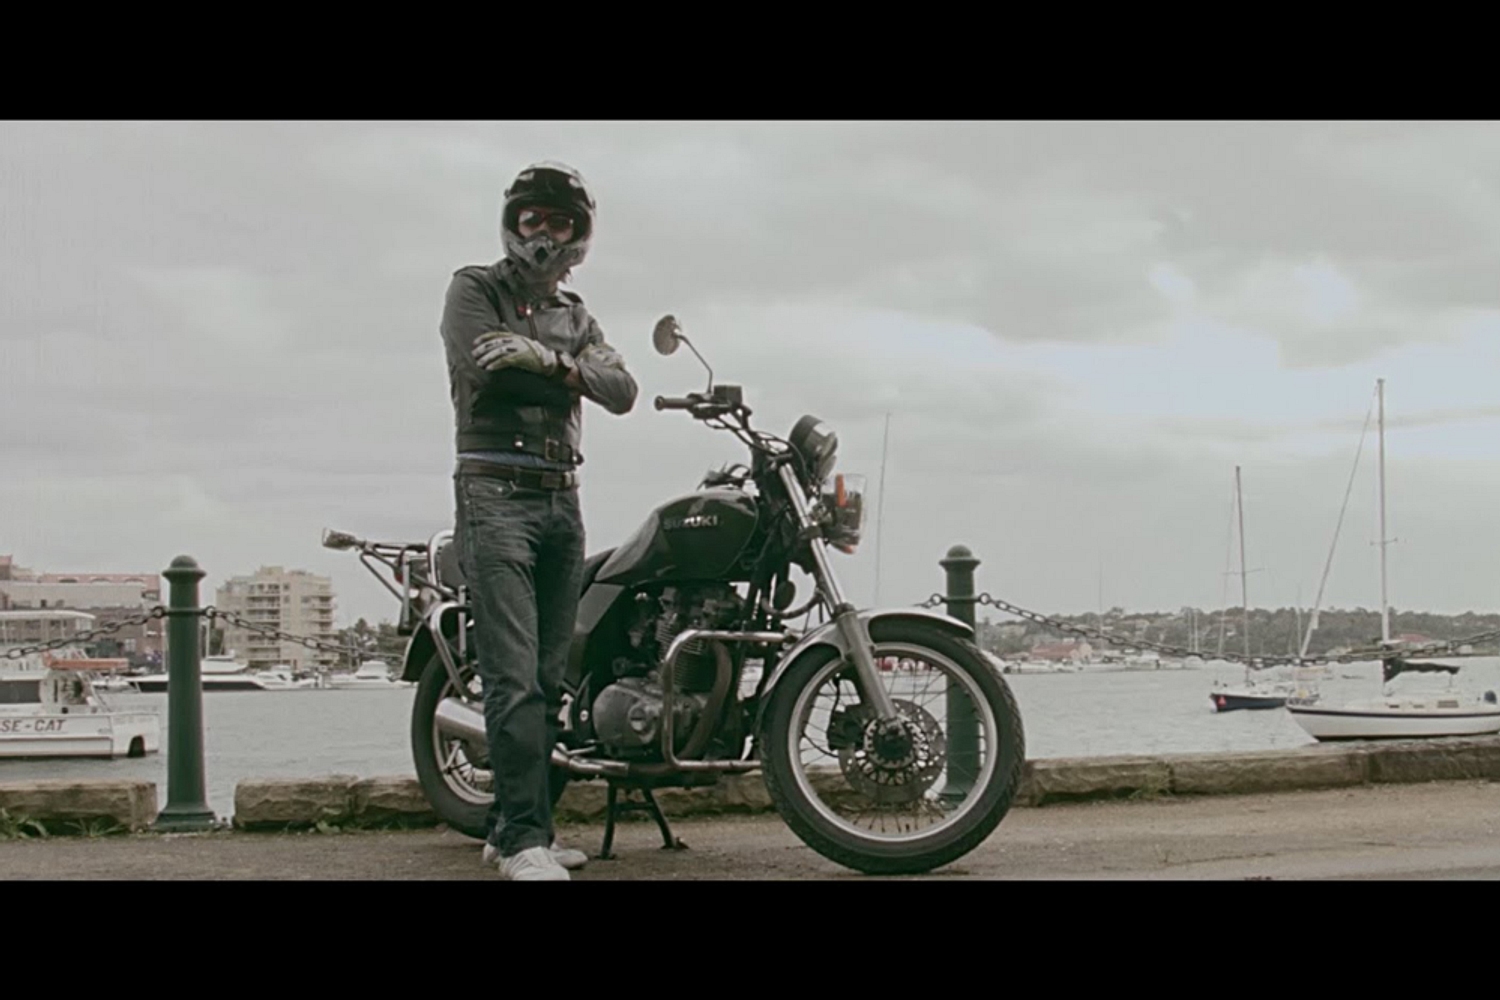 Jonathan Boulet starts a bike gang in ‘Hold It Down’ video